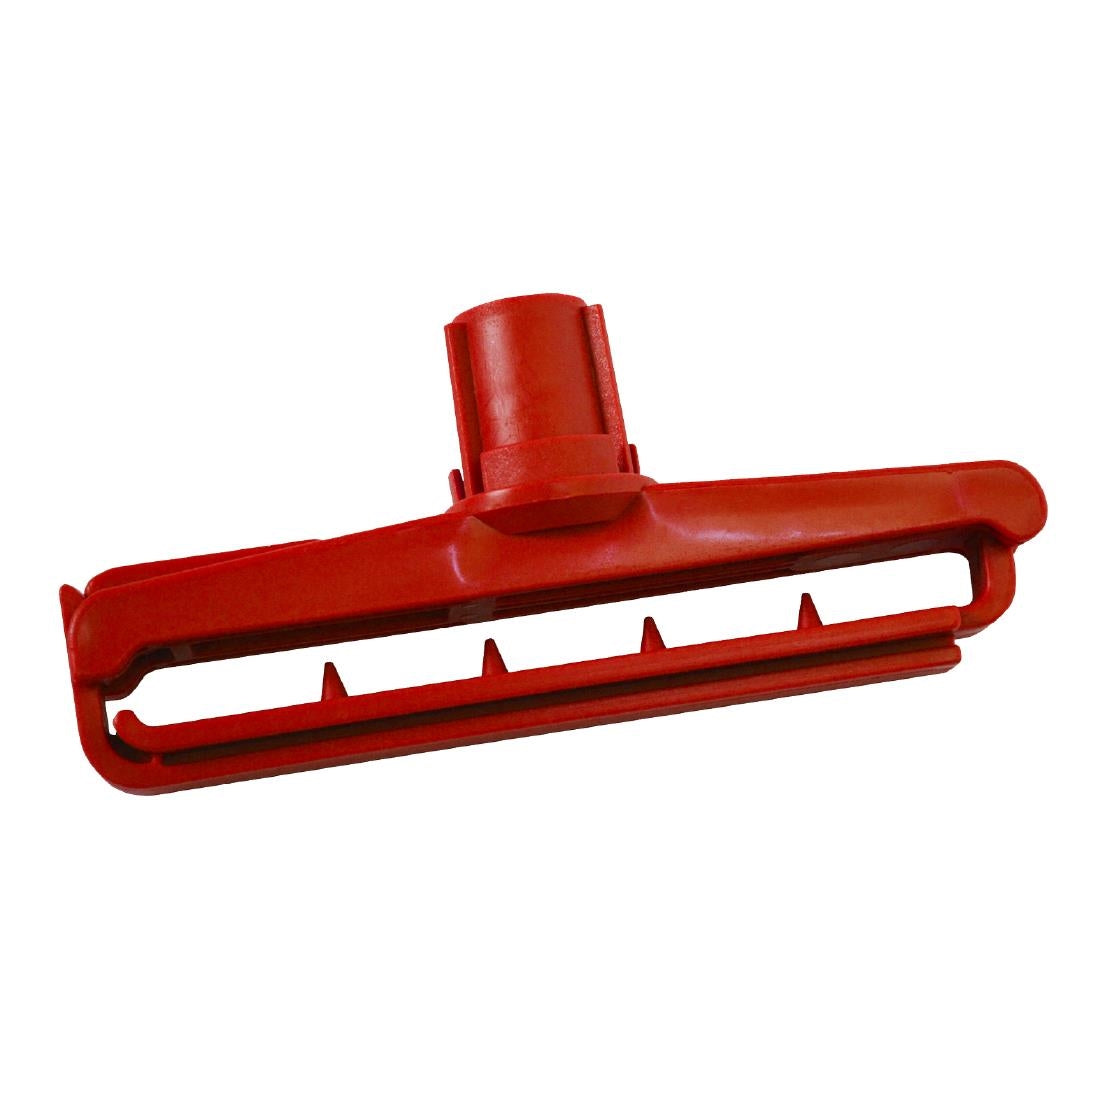 SYR Clip-It II Kentucky Mop Holder Red (Pack of 10)